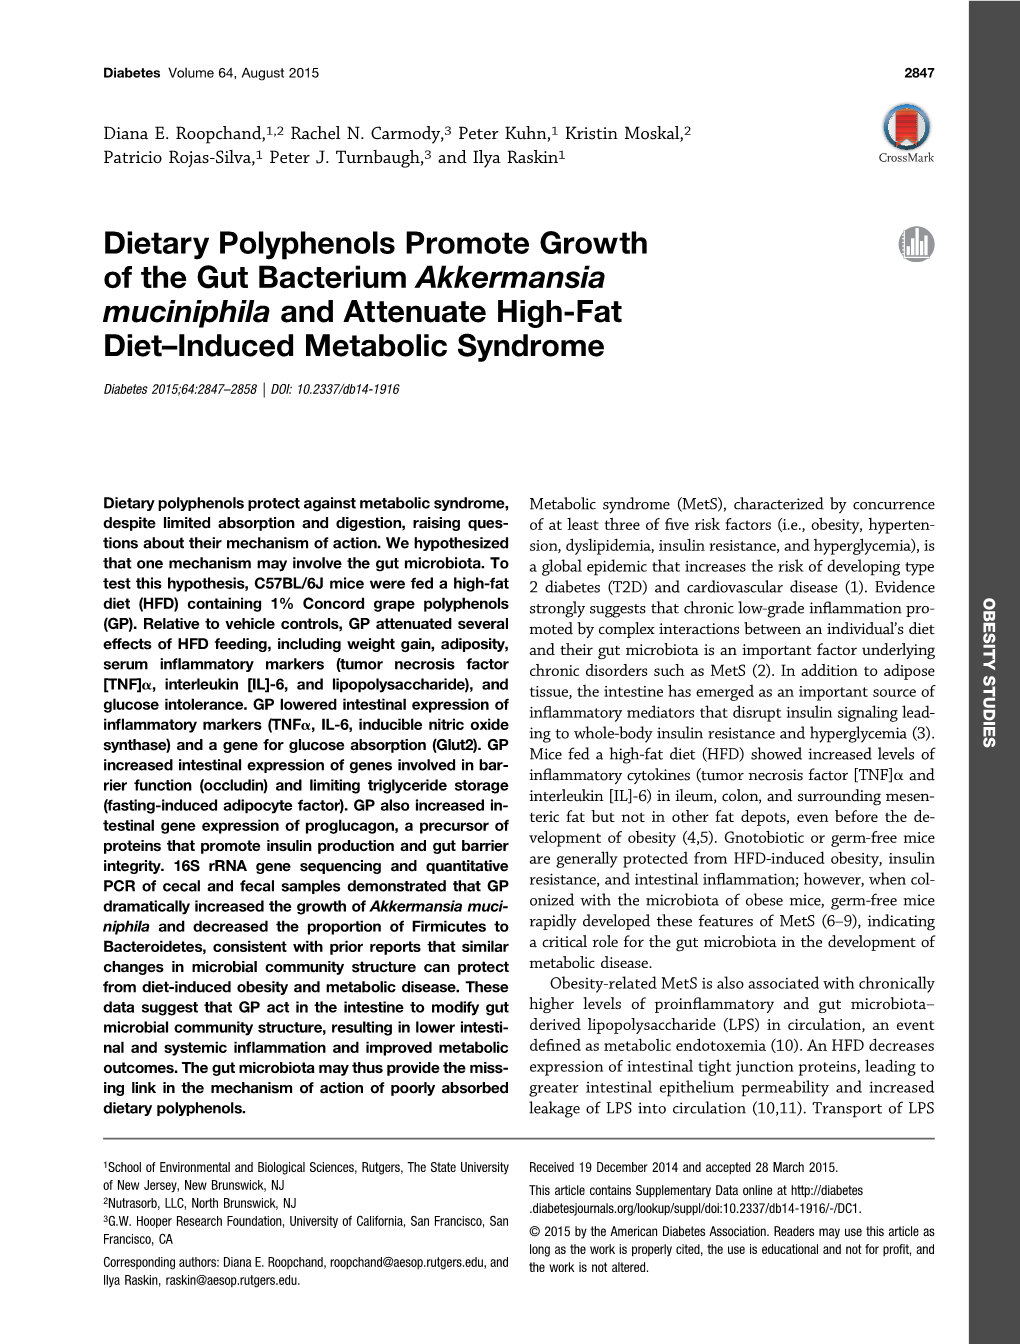 Dietary Polyphenols Promote Growth of the Gut Bacterium Akkermansia Muciniphila and Attenuate High-Fat Diet–Induced Metabolic Syndrome